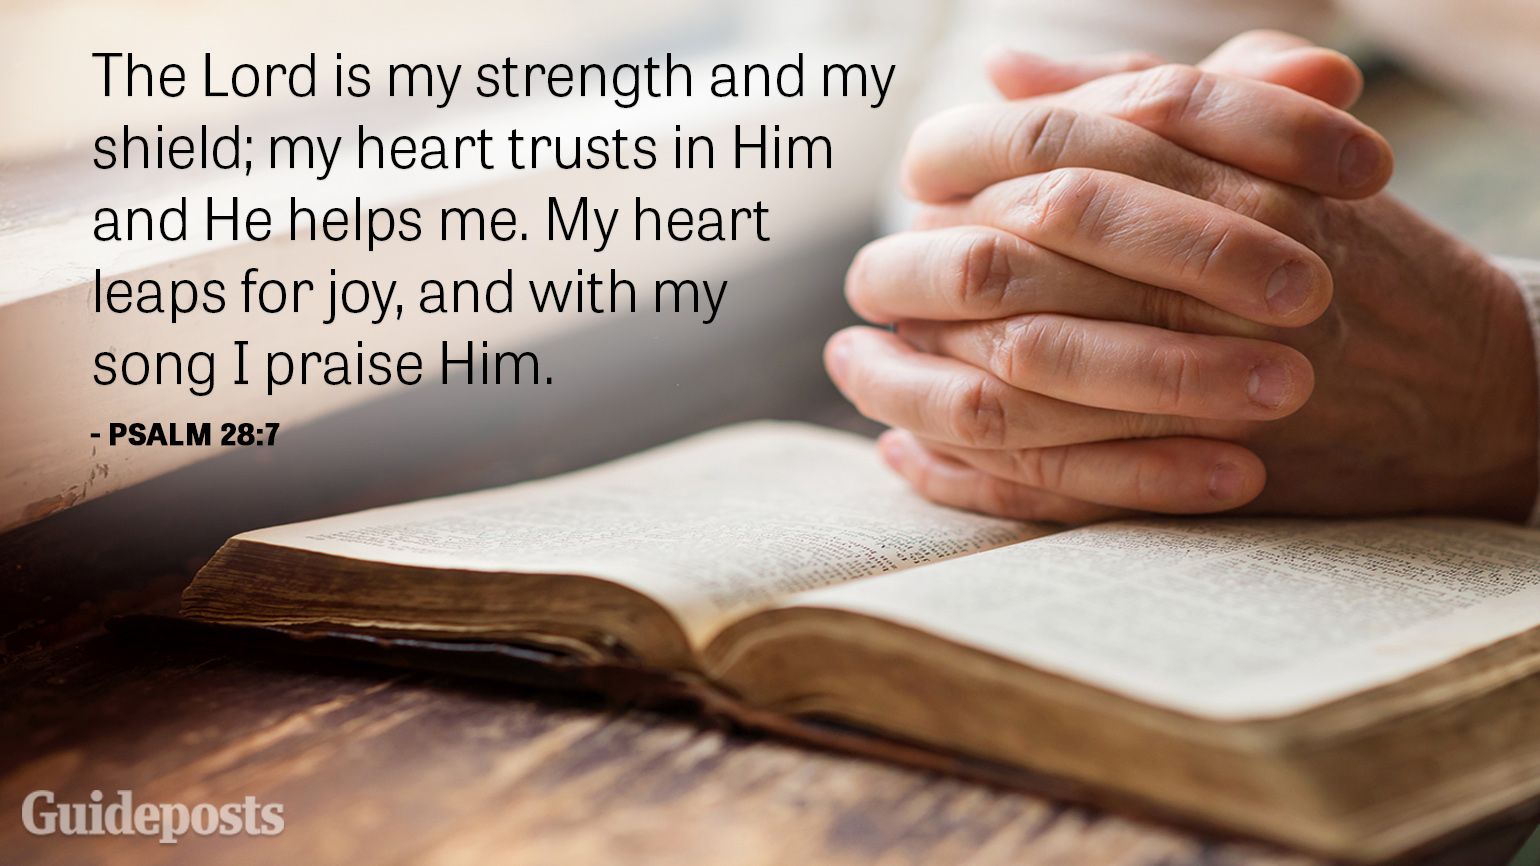 The Lord is my strength and my shield; my heart trusts in Him and He helps me. My heart leaps for joy, and with my song I praise Him.